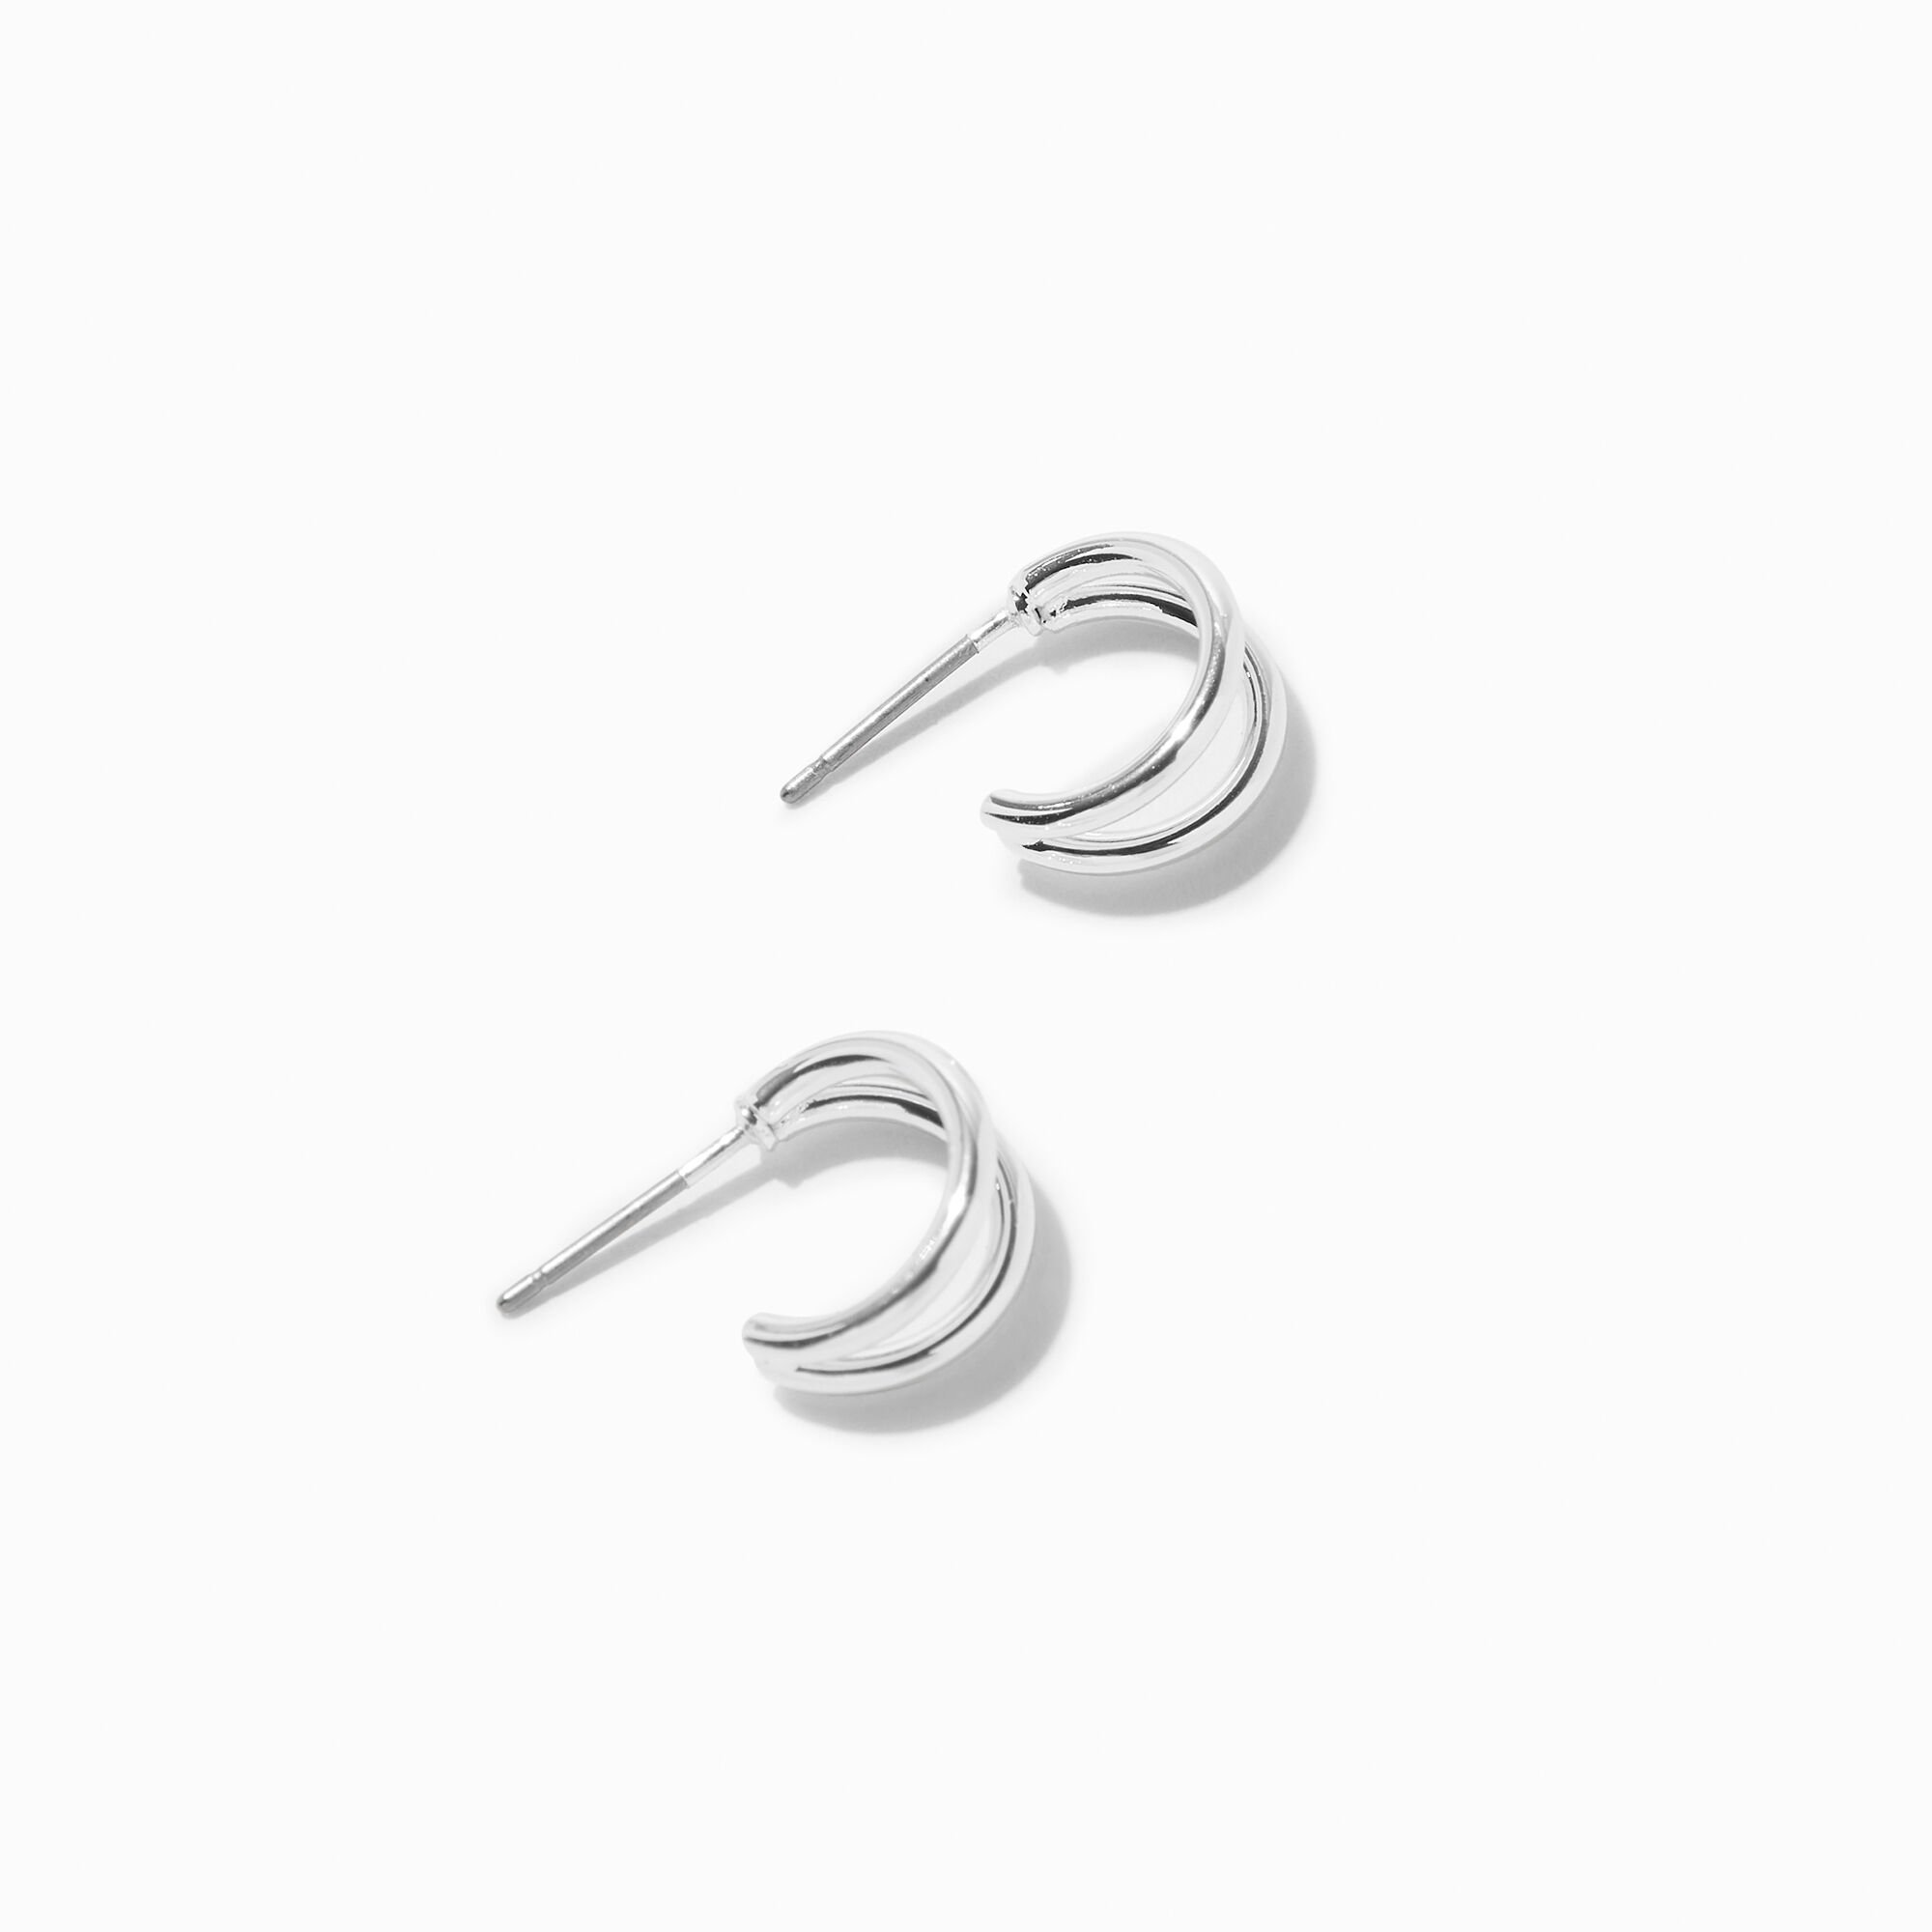 View C Luxe By Claires Plated 10MM Double Hoop Earrings Silver information